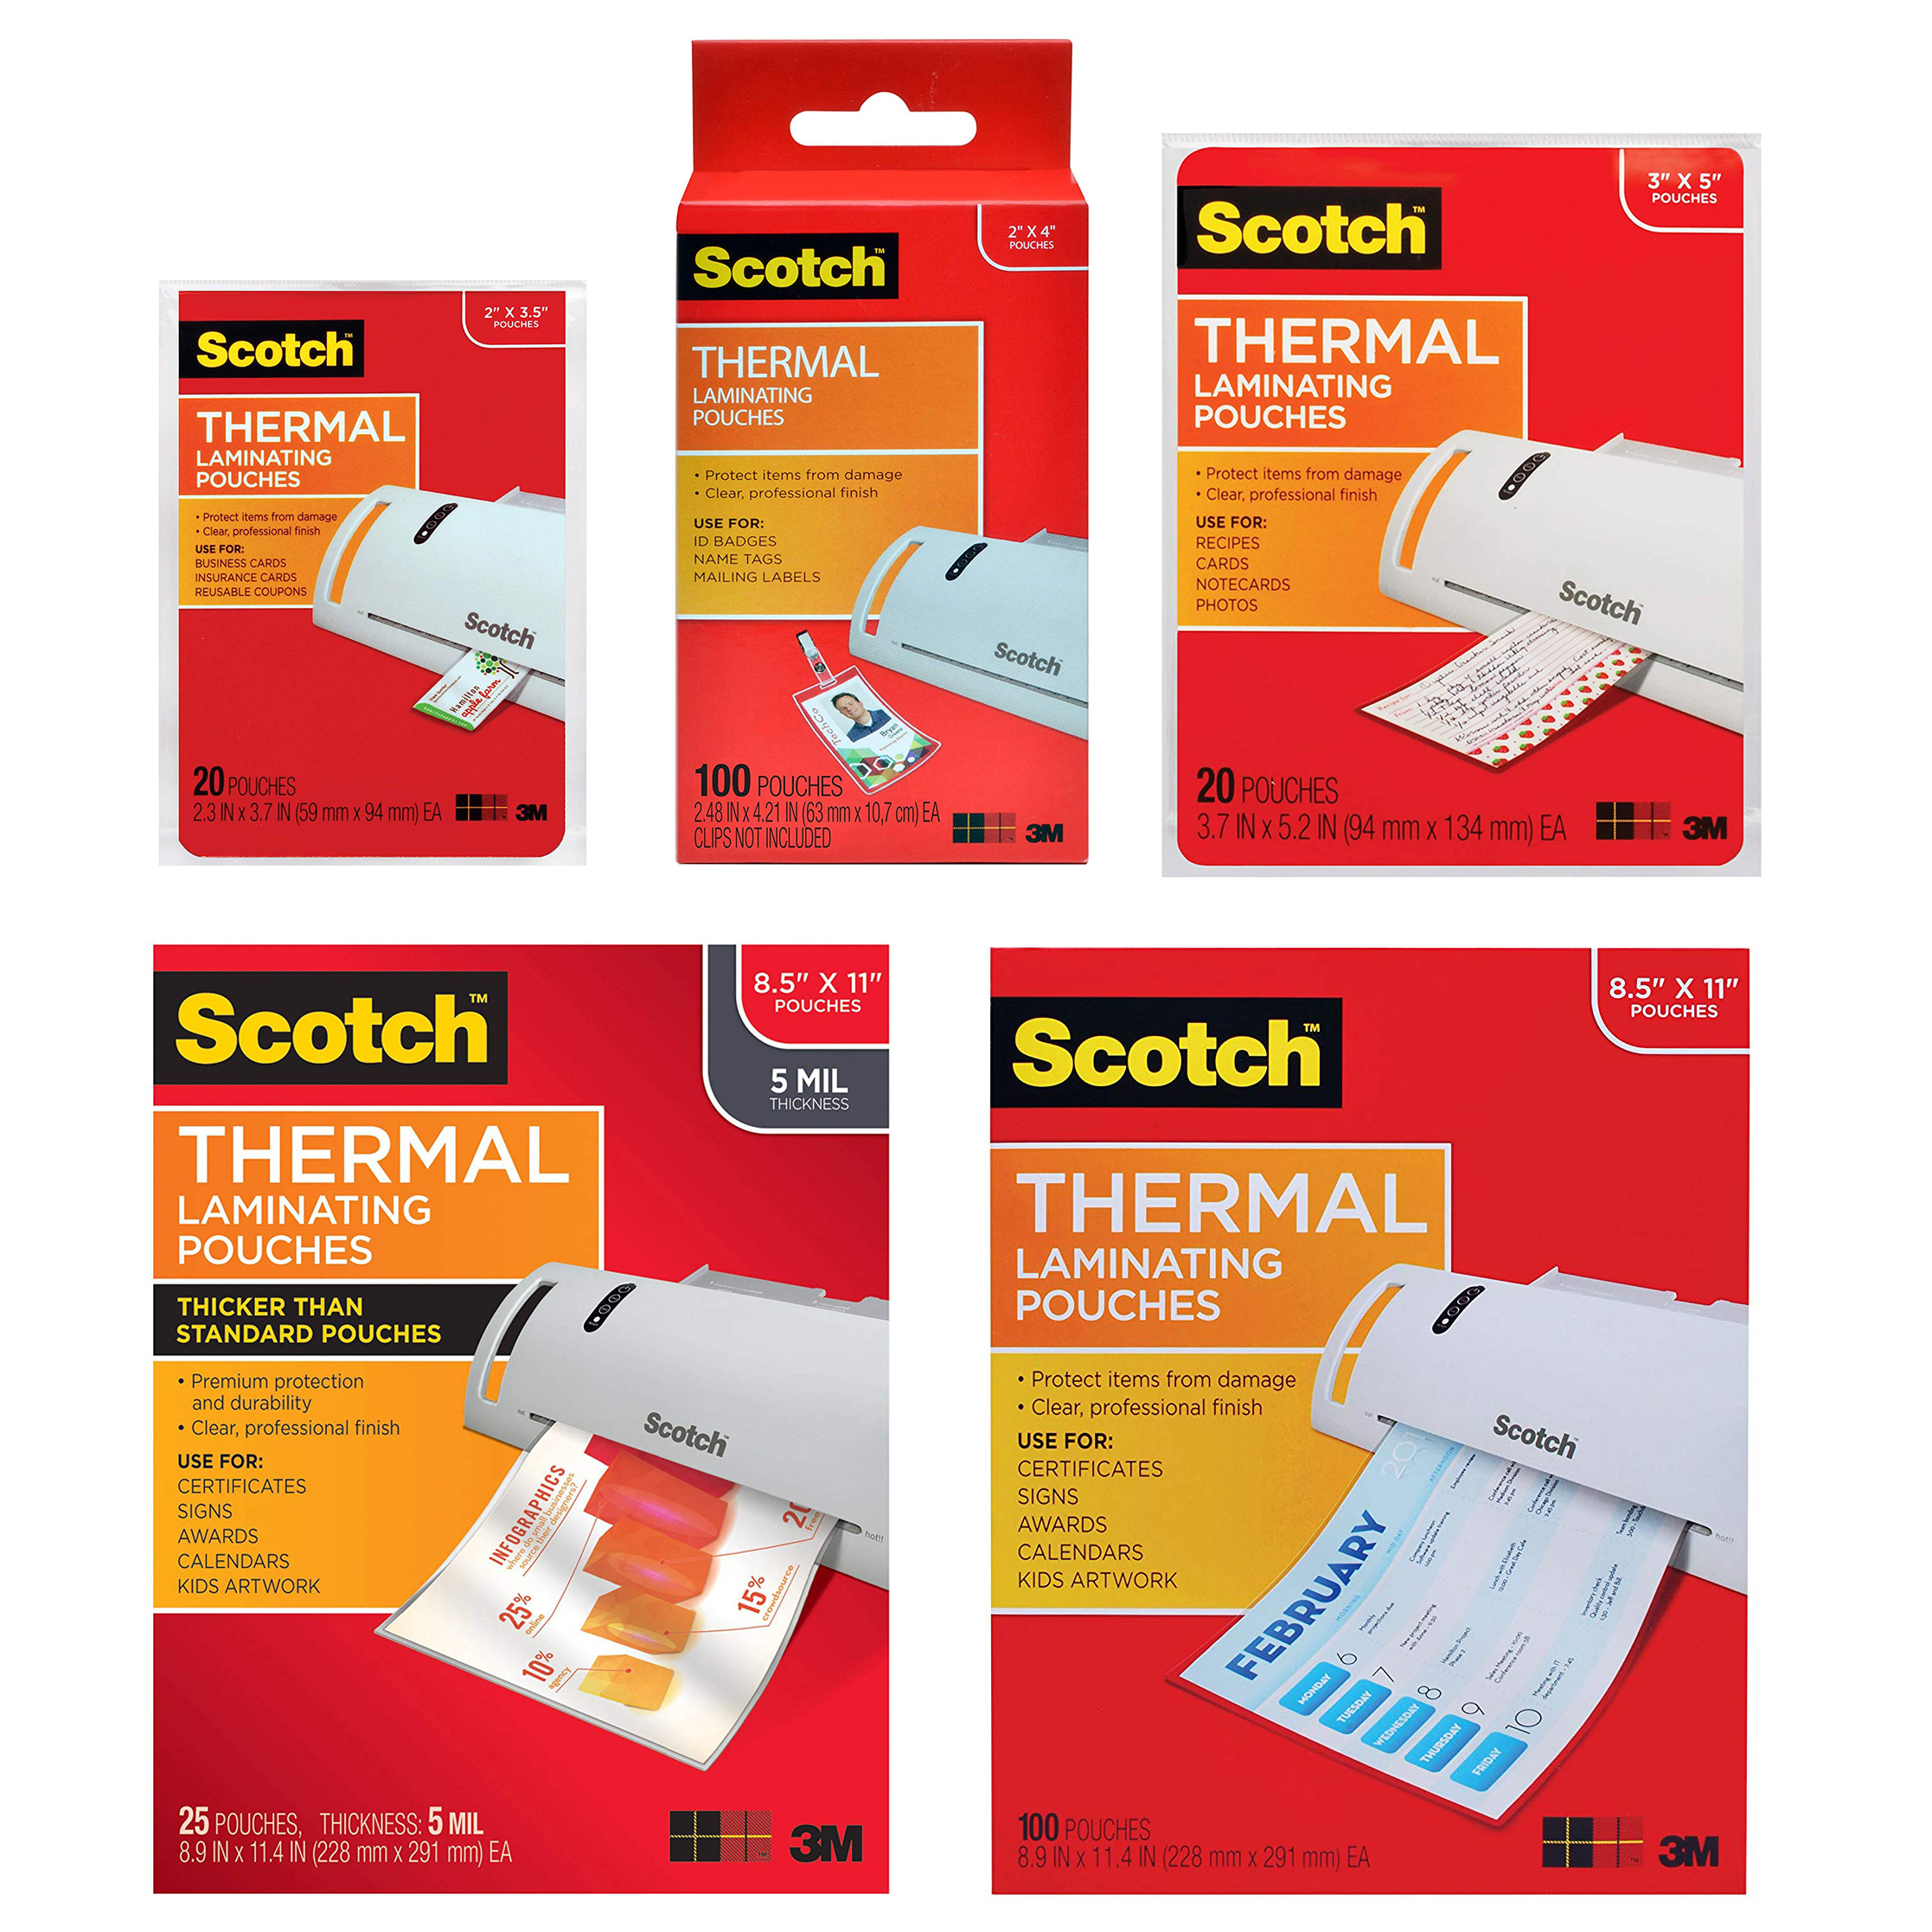 8.9 x 11.4 inches 100-Pack - 2 Pack Scotch Thermal Laminating Pouches Letter Size Sheets TP3854-100 